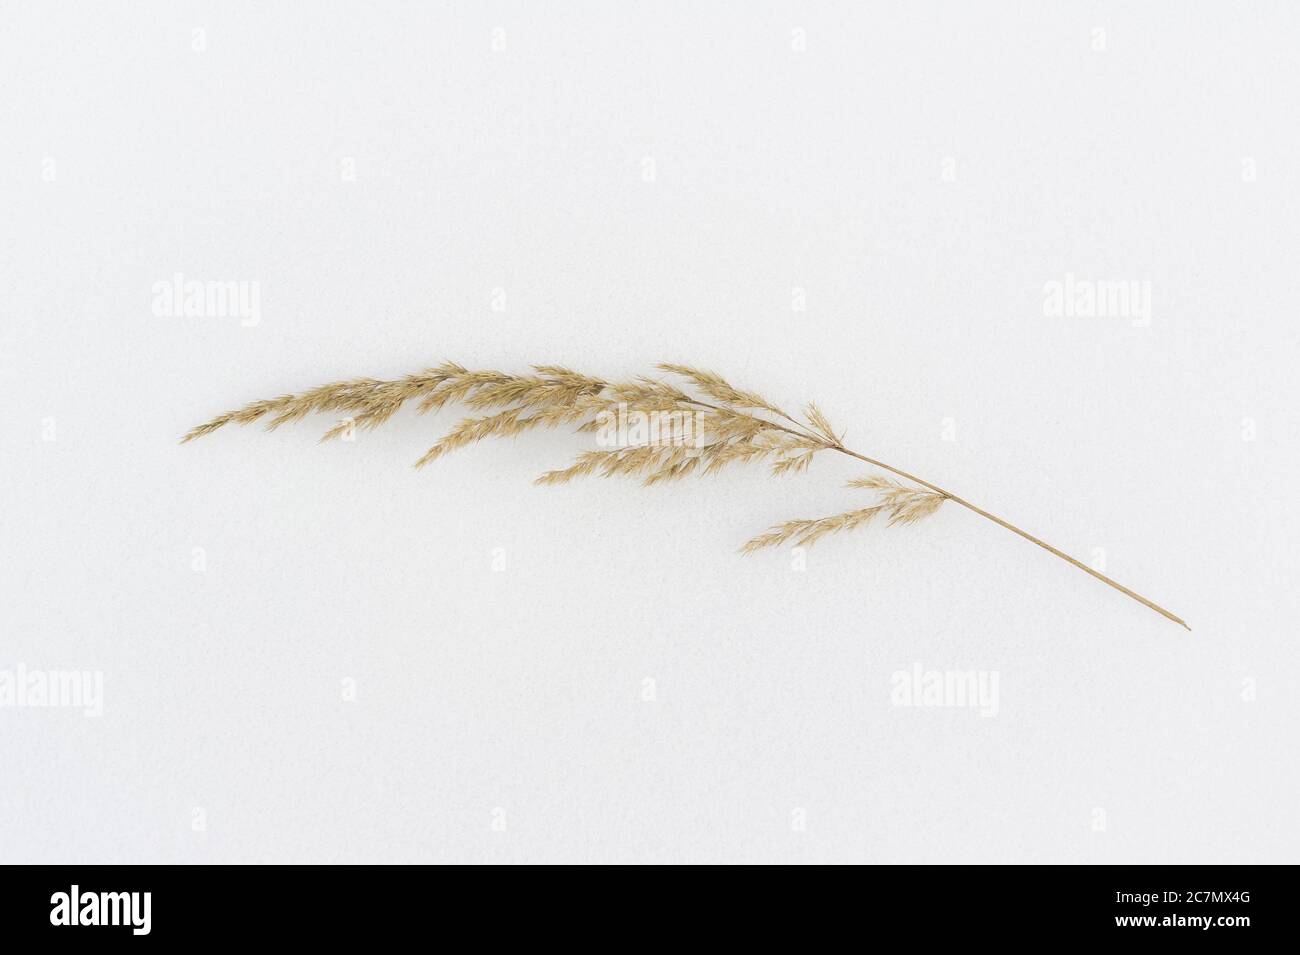 Minimalist and simple detail of nature - flat lay of dried straw on the snow. White area as copy space Stock Photo